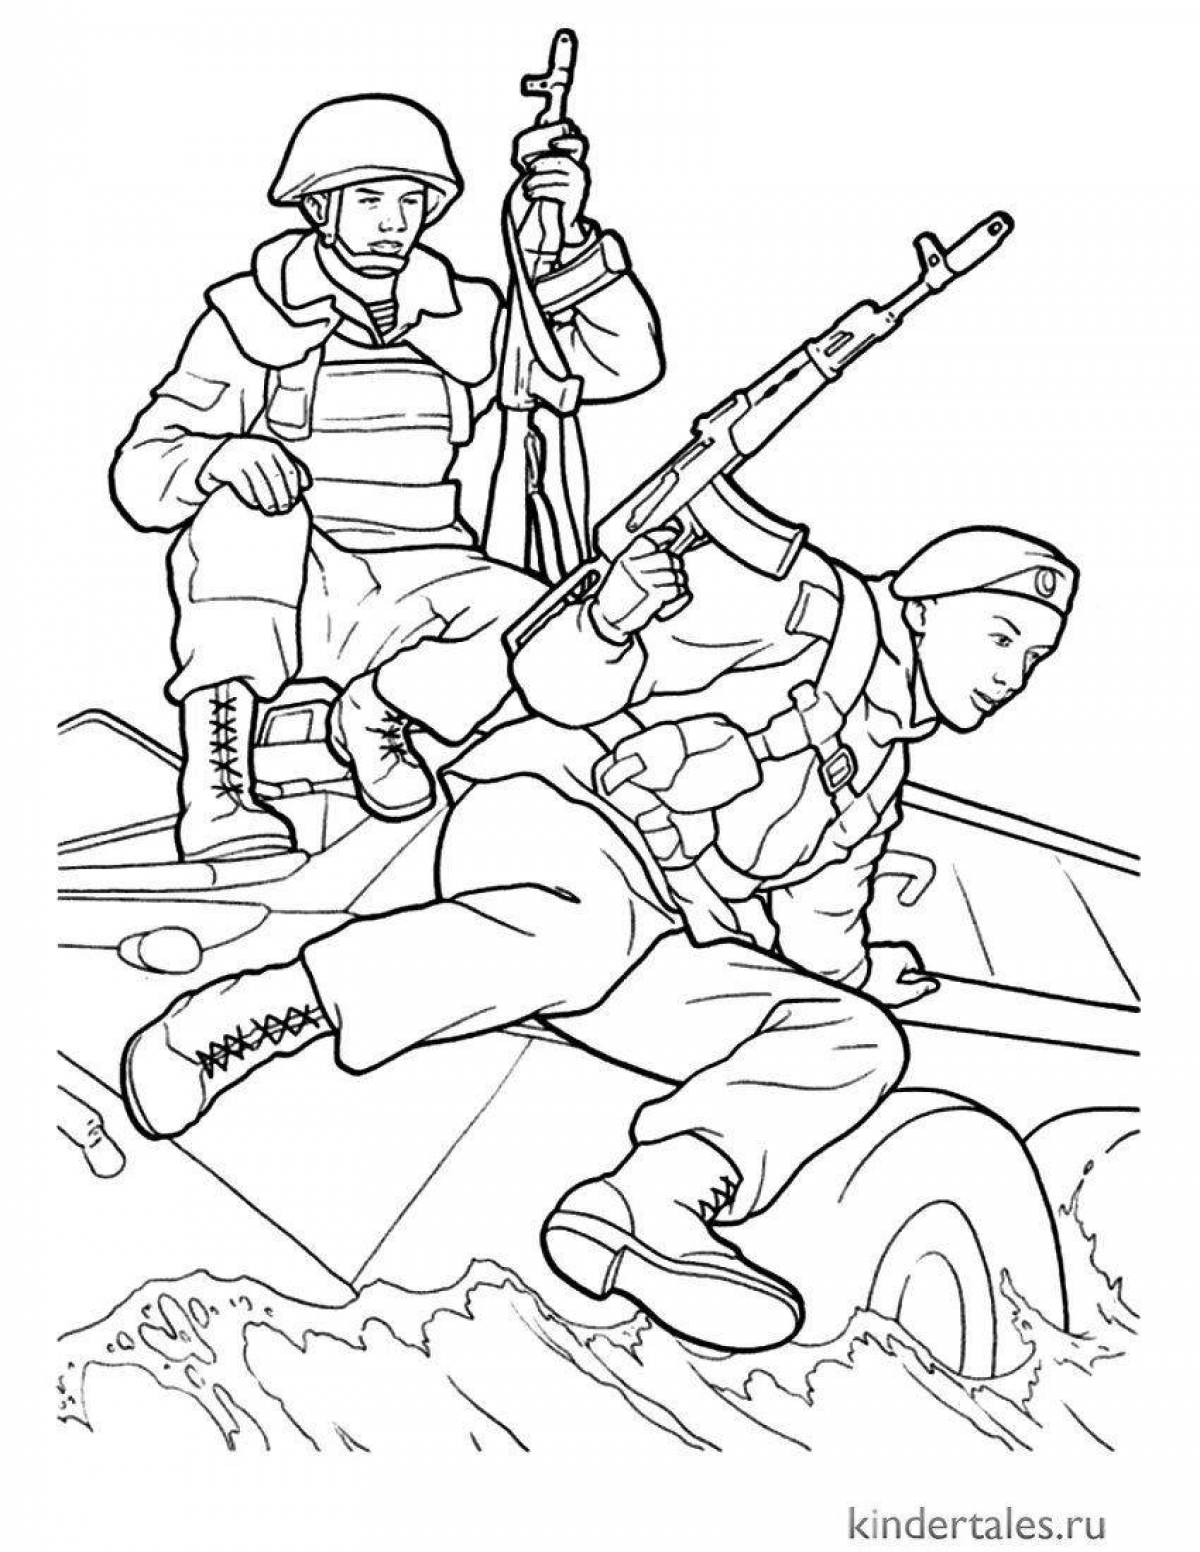 Innovative military coloring book for kids